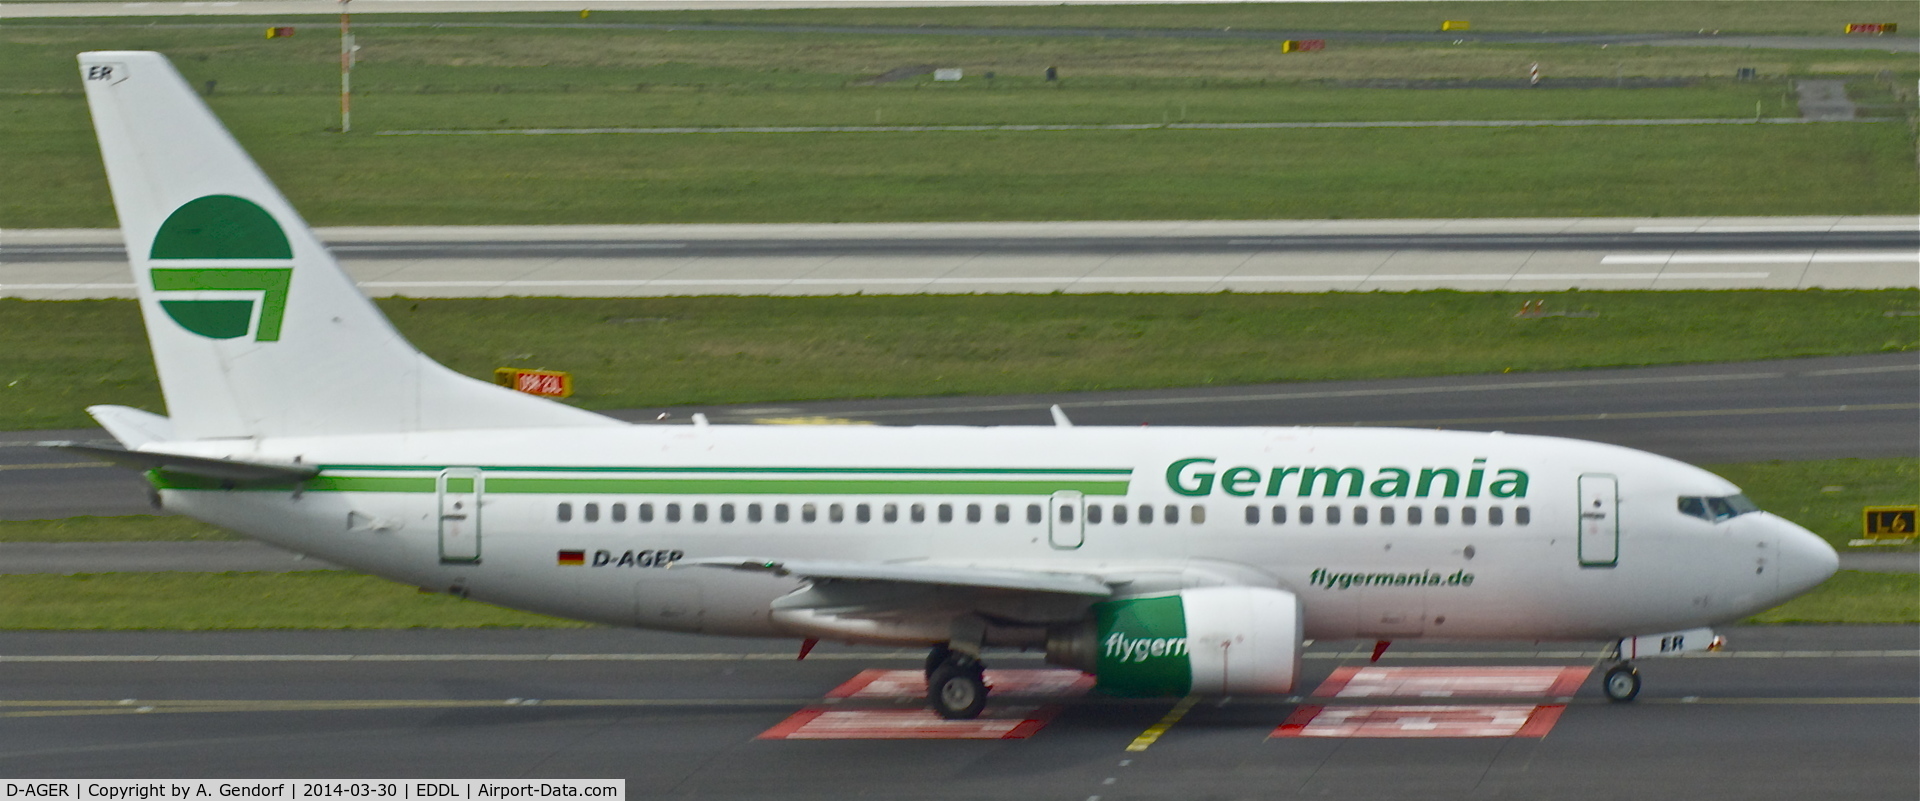 D-AGER, 1998 Boeing 737-75B C/N 28107, Germania, is here on the way to RWY 23L at Düsseldorf Int'l(EDDL)